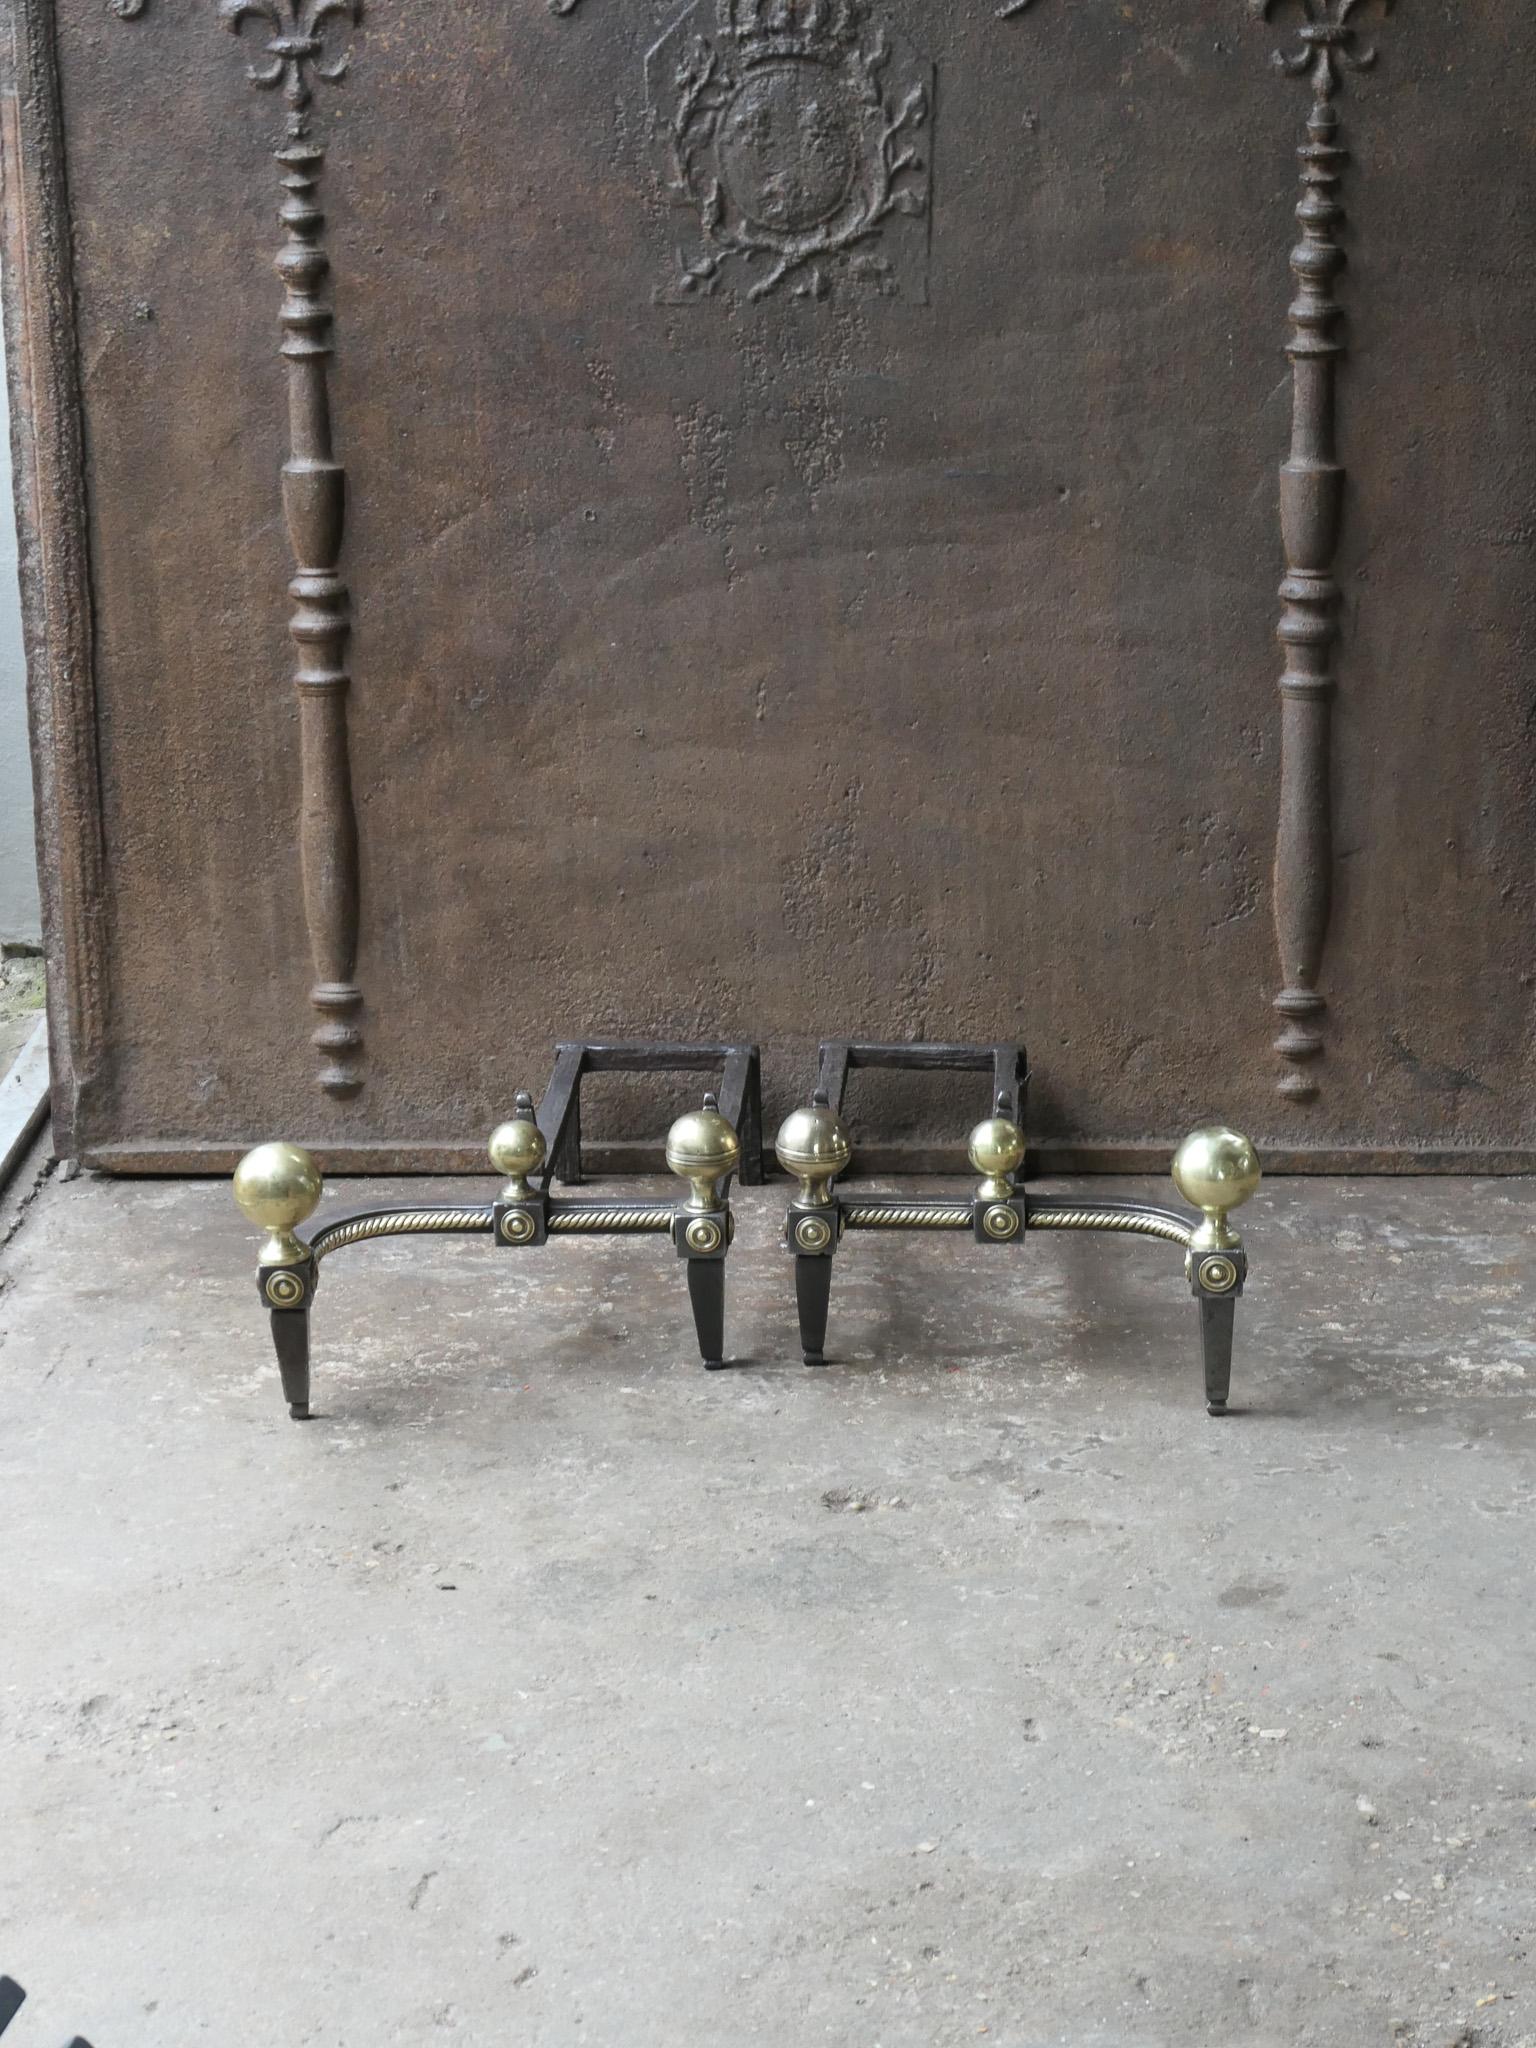 19th century Dutch Victorian period fireplace basket, fire grate made of wrought iron and polished brass. The fireplace grate is in a good condition and is fit for use in the fireplace. See detail photo for some damage at one of the beams.

The